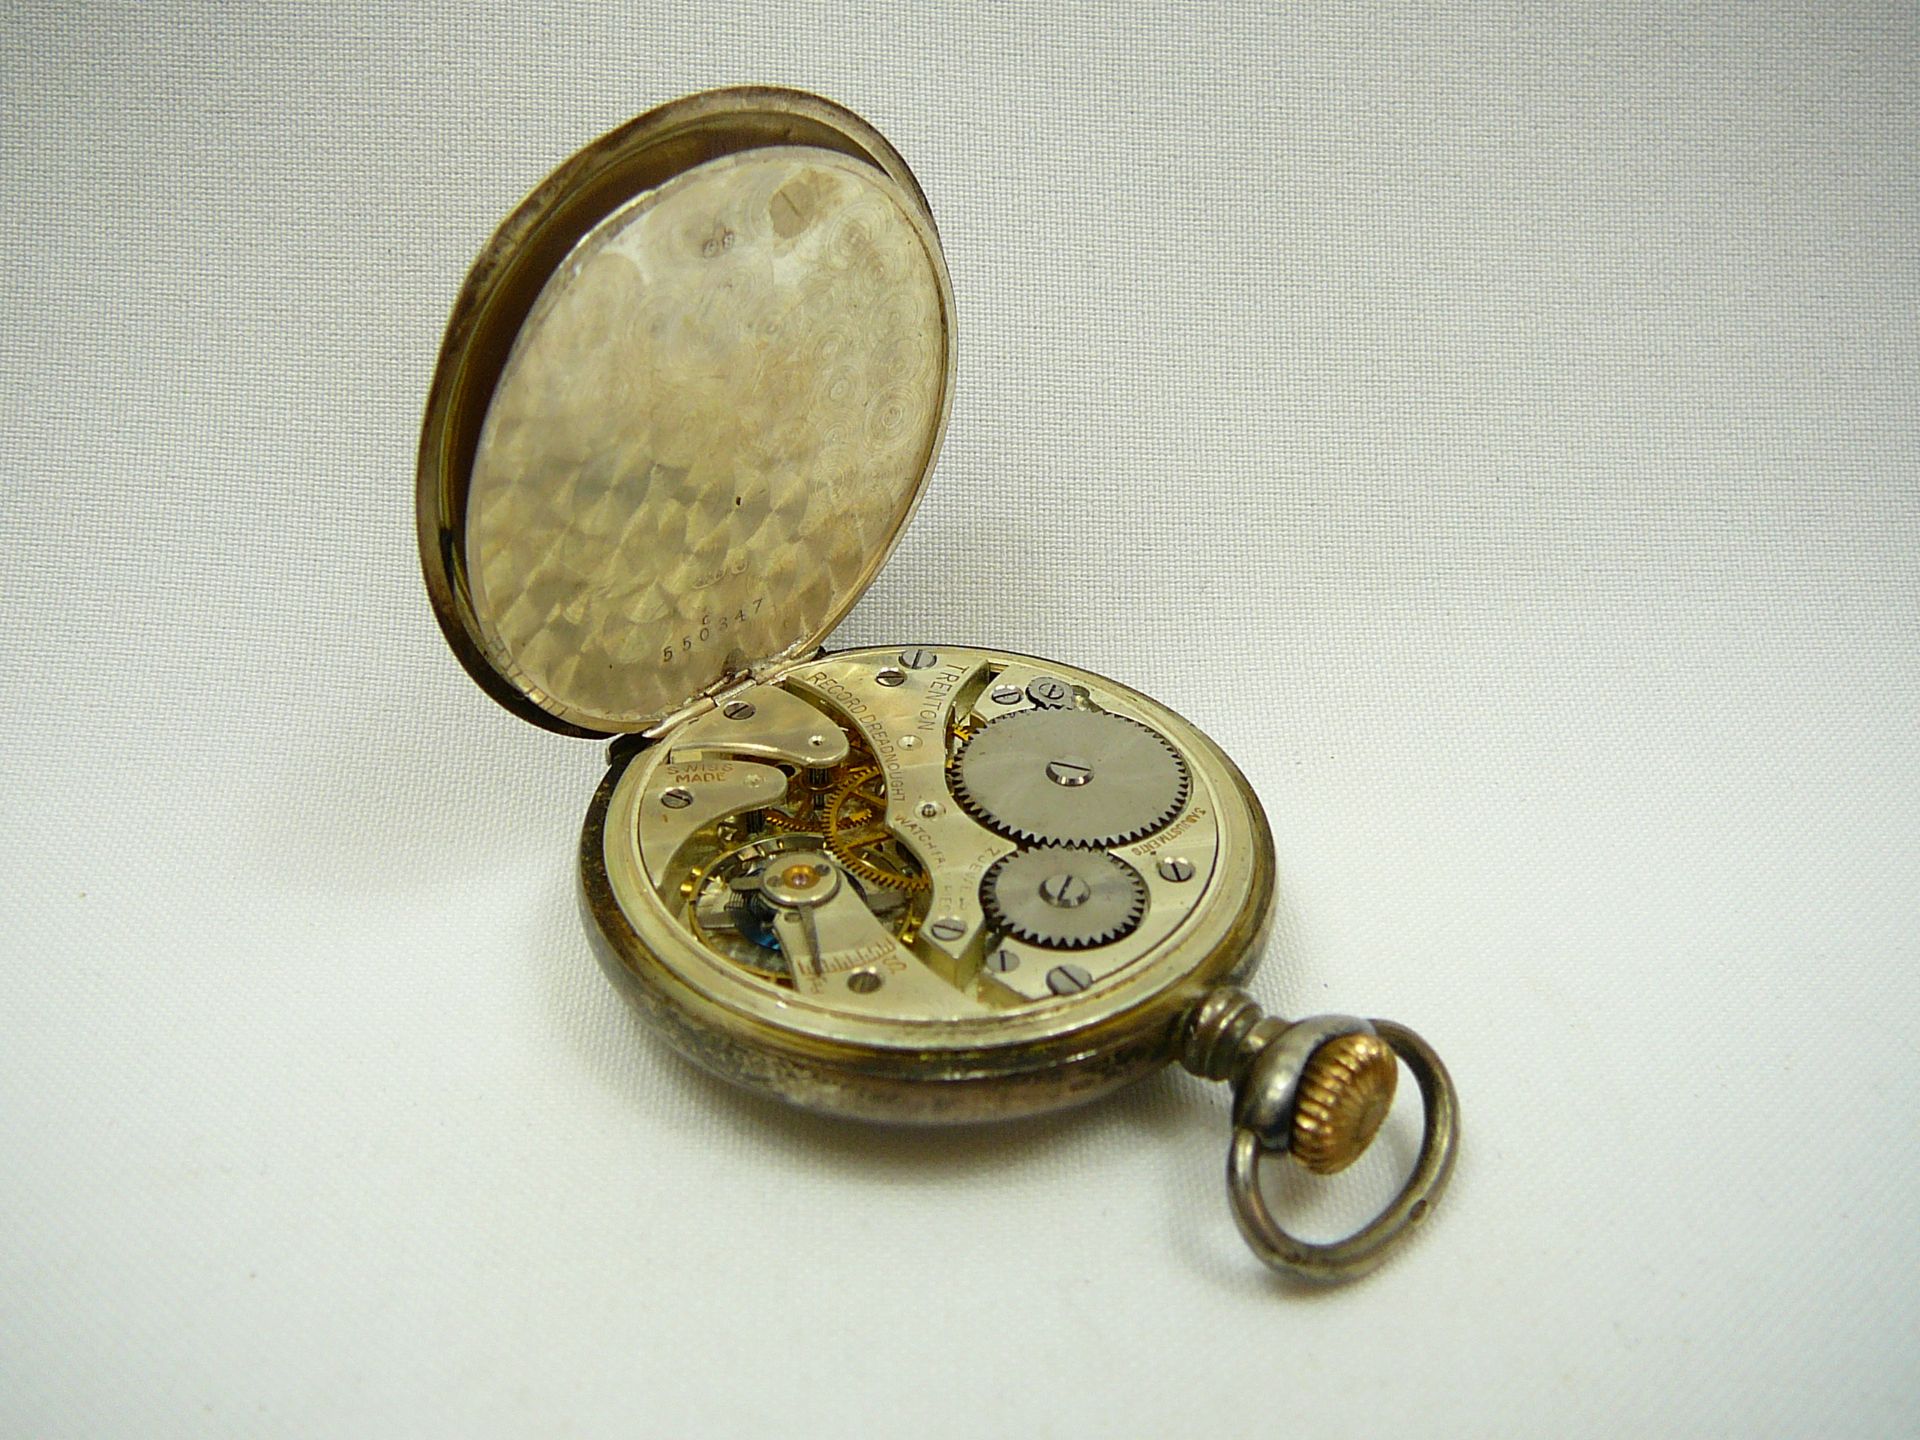 Gents Antique Silver Pocket Watch by Trenton - Image 4 of 5